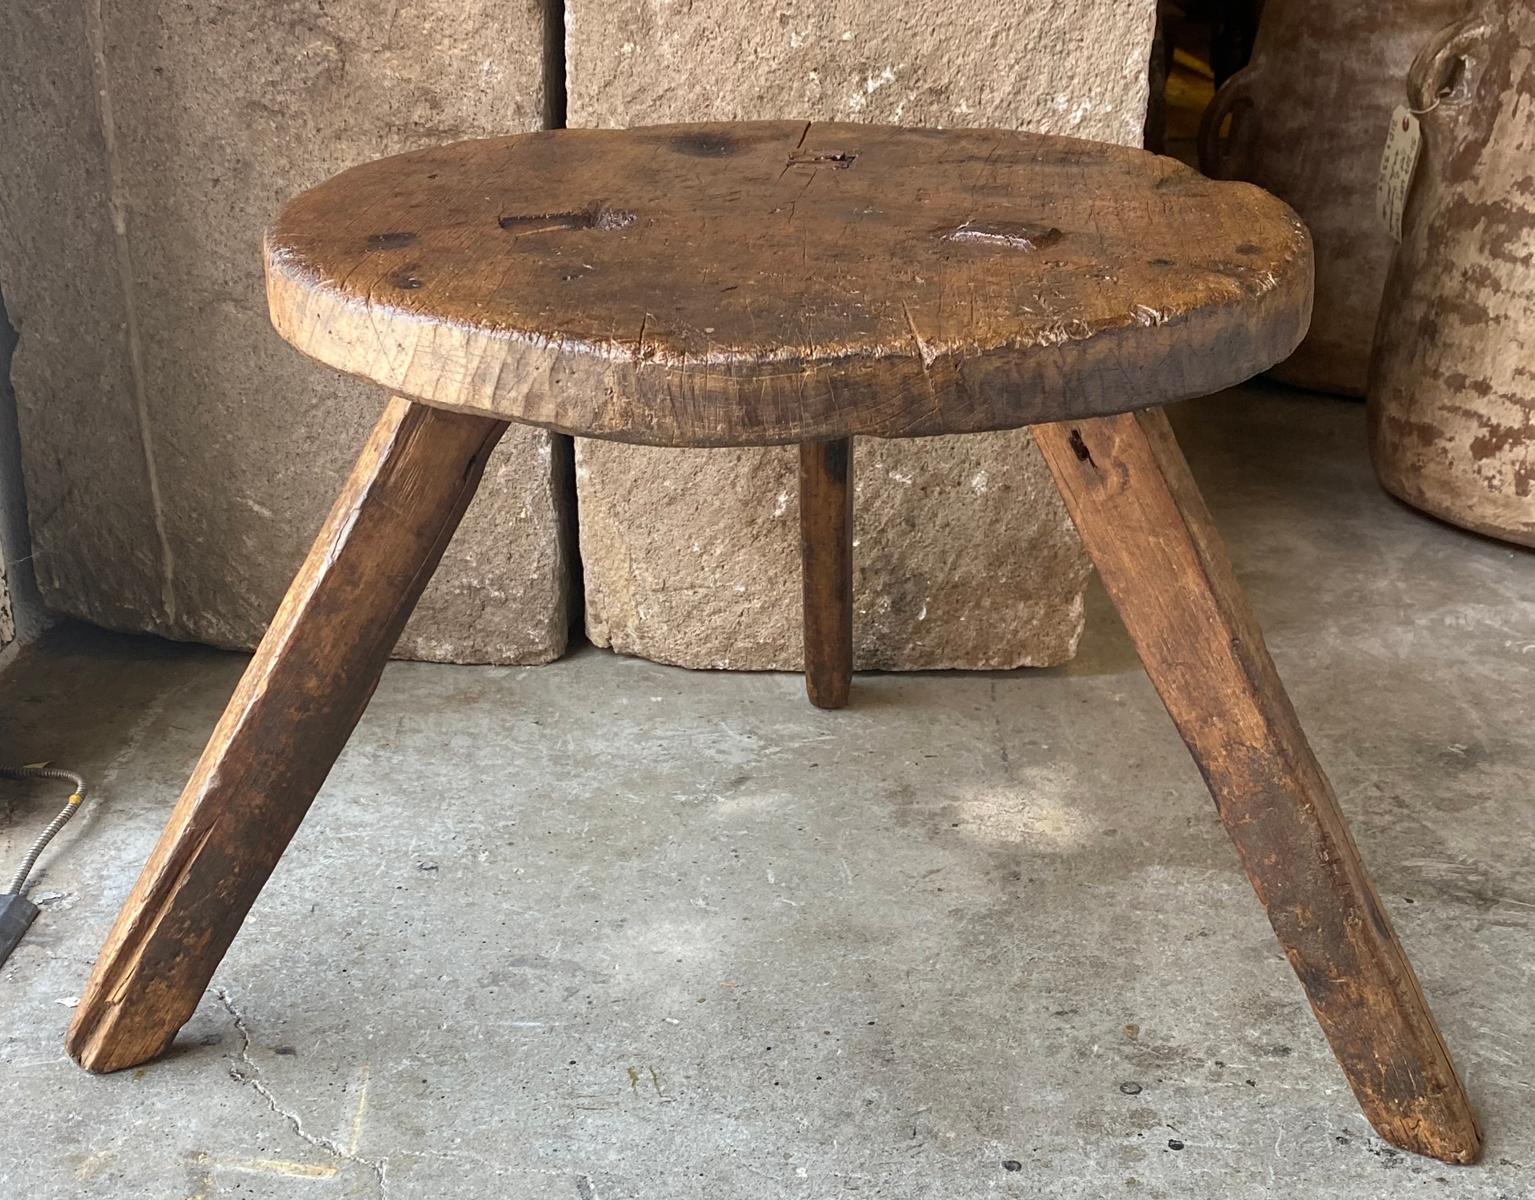 This piece can be used as side table or stool. Footprint of legs is a 25.5 triangle.
The round top shows signs of being used as a candle stand, hence the old burn marks, which add to the soft patina. Easy to pick up and move around where ever you